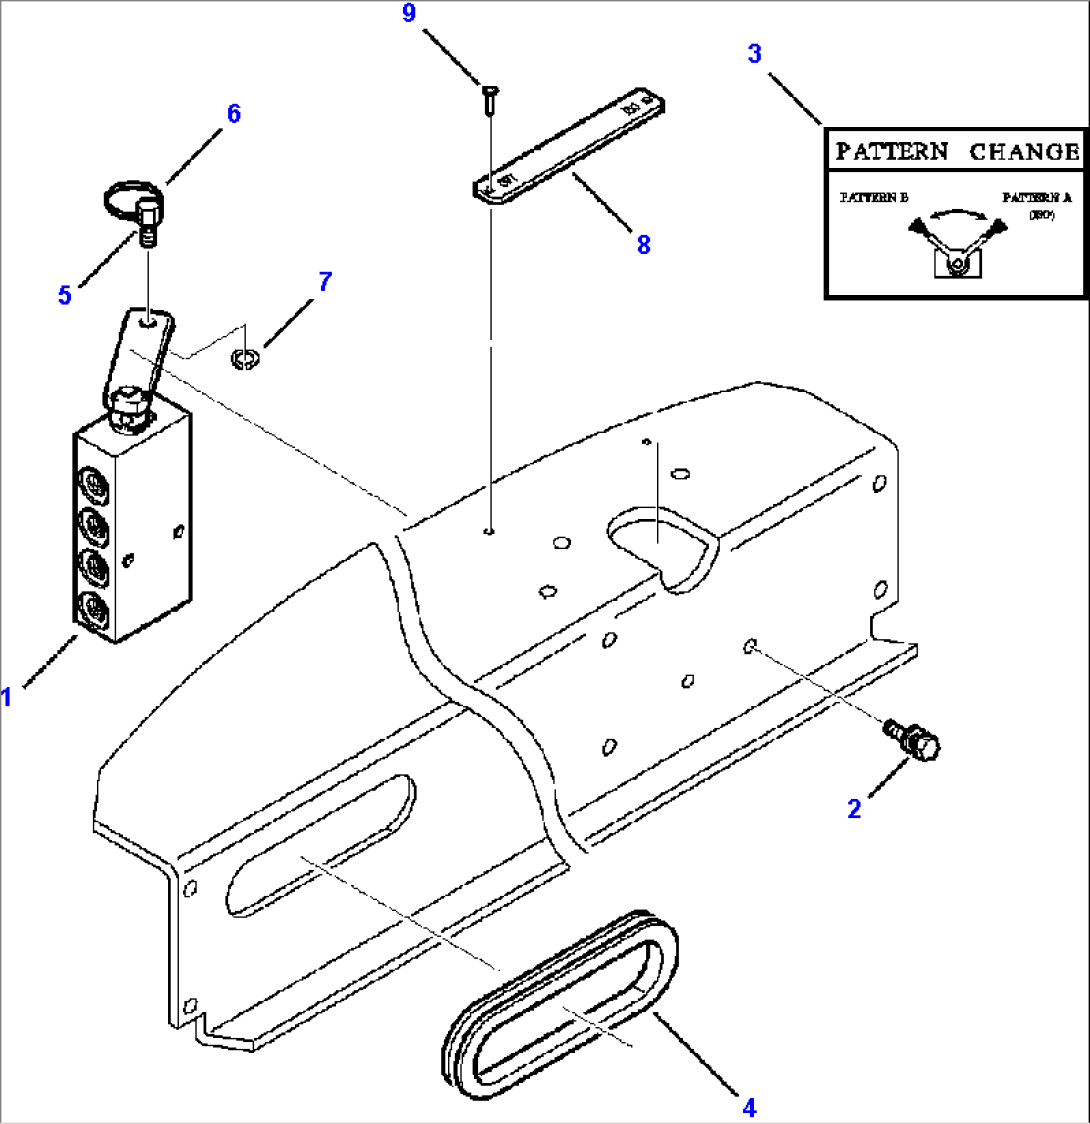 FIG. K4800-P1A0 PPC SYSTEM - PATTERN VALVE MOUNTING